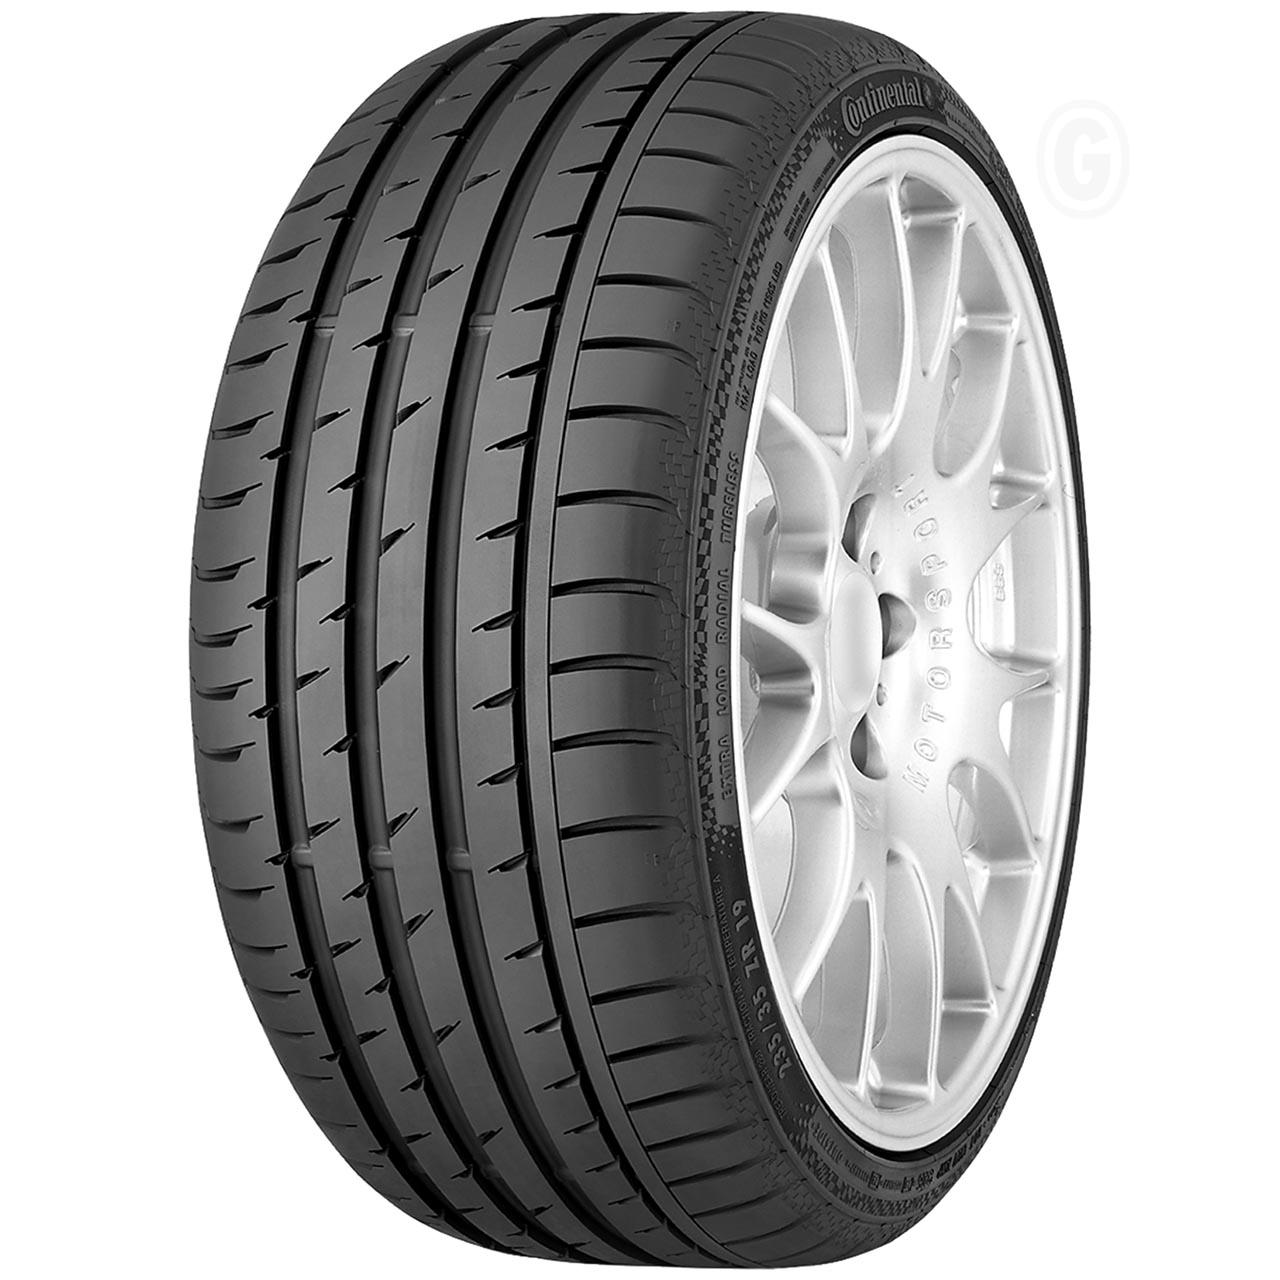 Continental CONTISPORTCONTACT 3 205/45R17 84W SSR *